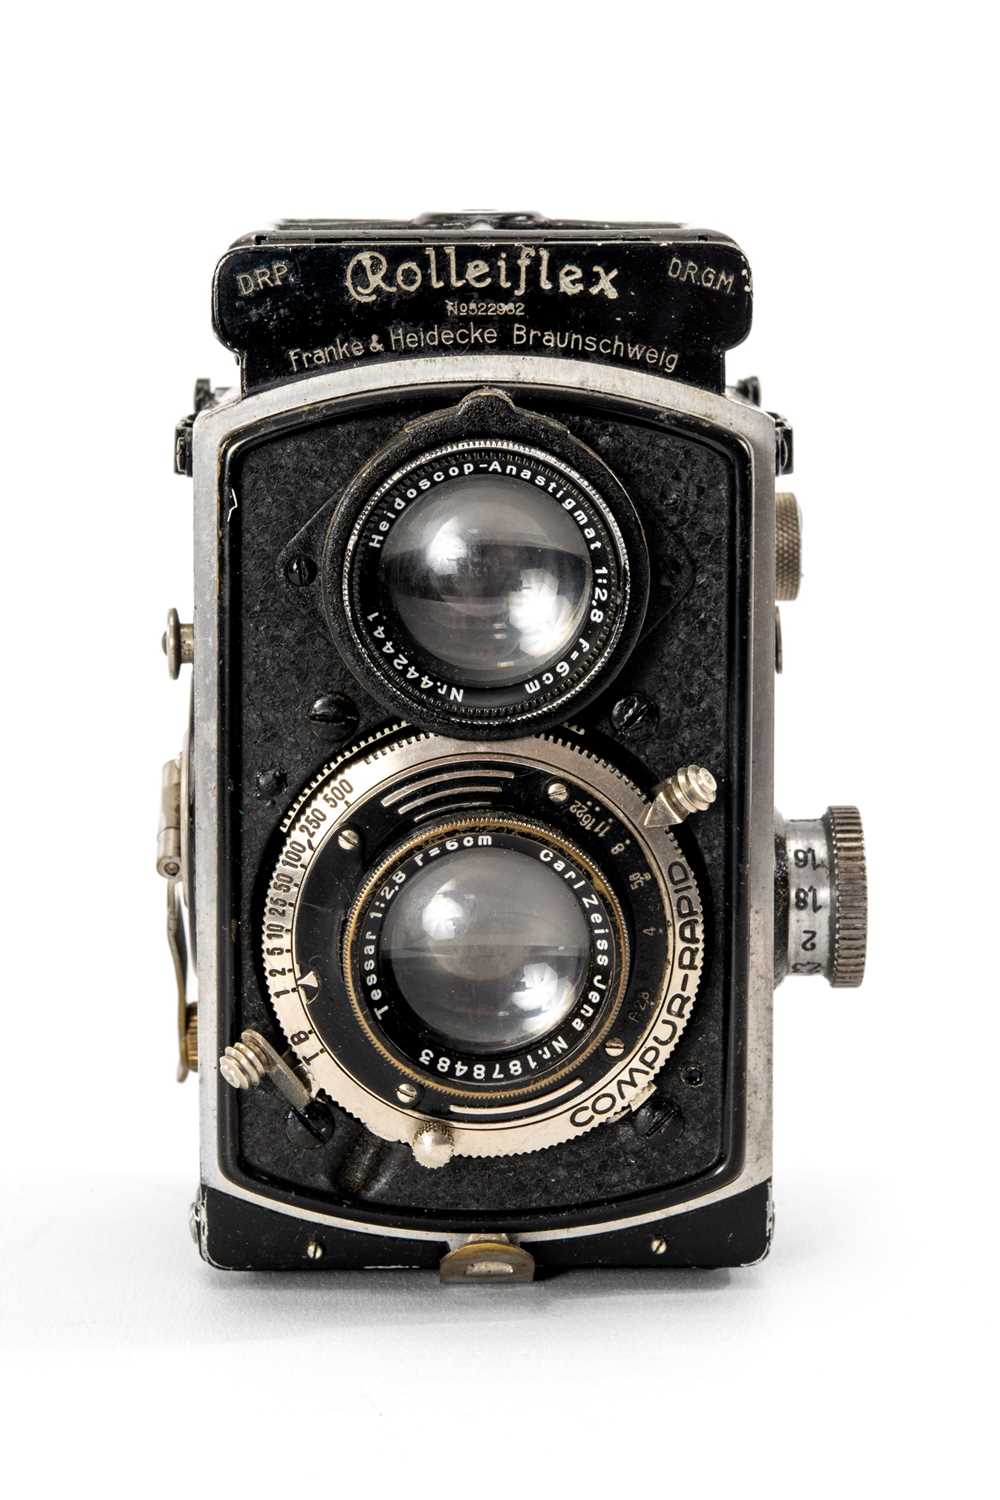 A BABY ROLLEIFLEX 2.8F TLR CAMERA - black, serial no. 5189268, with a Carl Zeiss Jena Tessar f/2.8